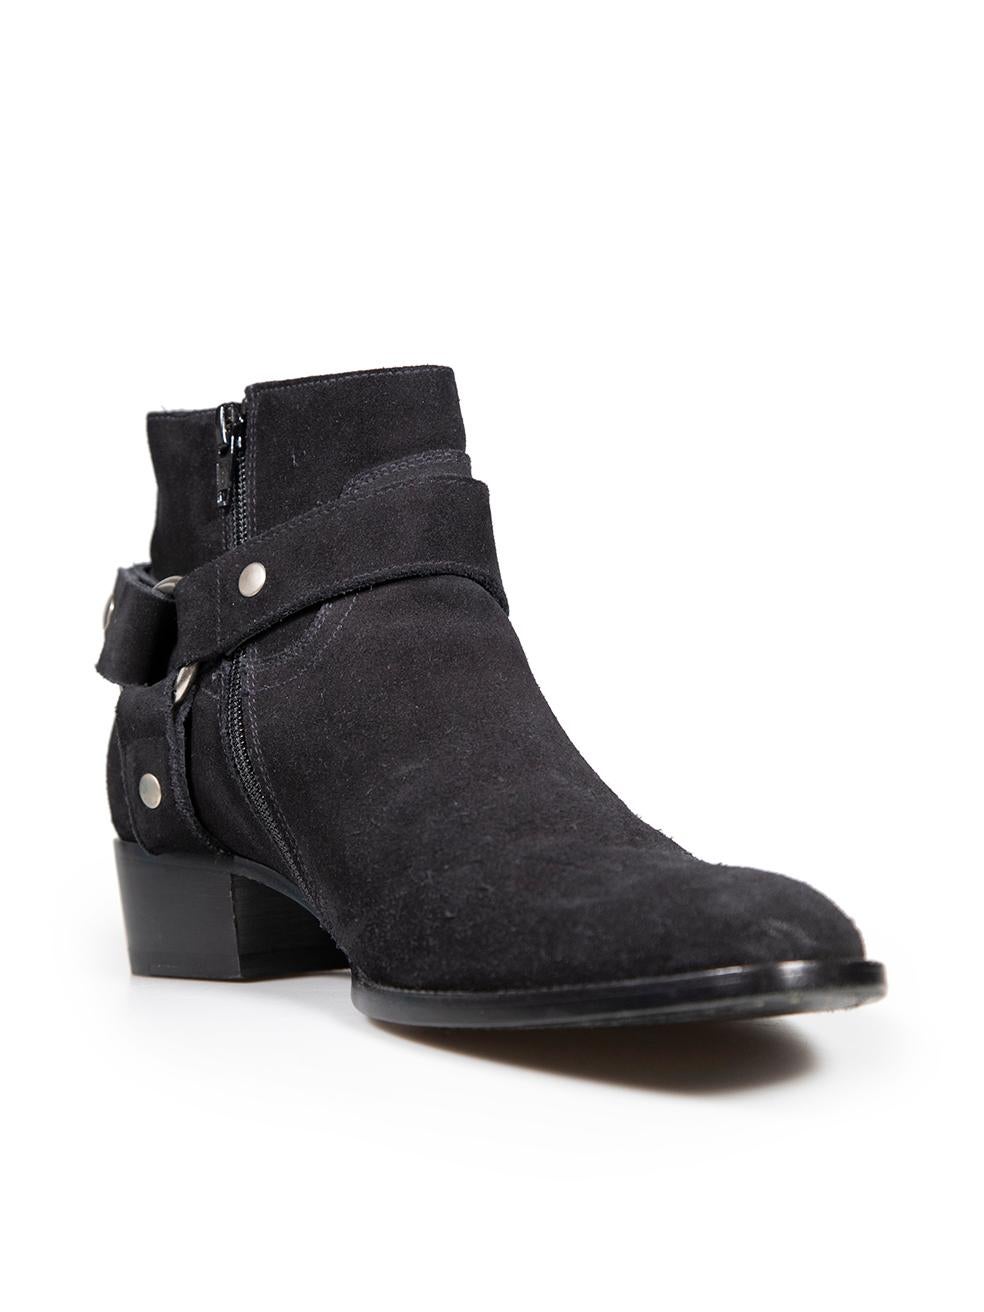 CONDITION is Very good. Minimal wear to boots is evident. Minimal wear to both boot toes and heels with very light abrasions to the suede on this used Saint Laurent designer resale item.
 
 Details
 Model: Wyatt
 Black
 Suede
 Ankle boots
 Buckle